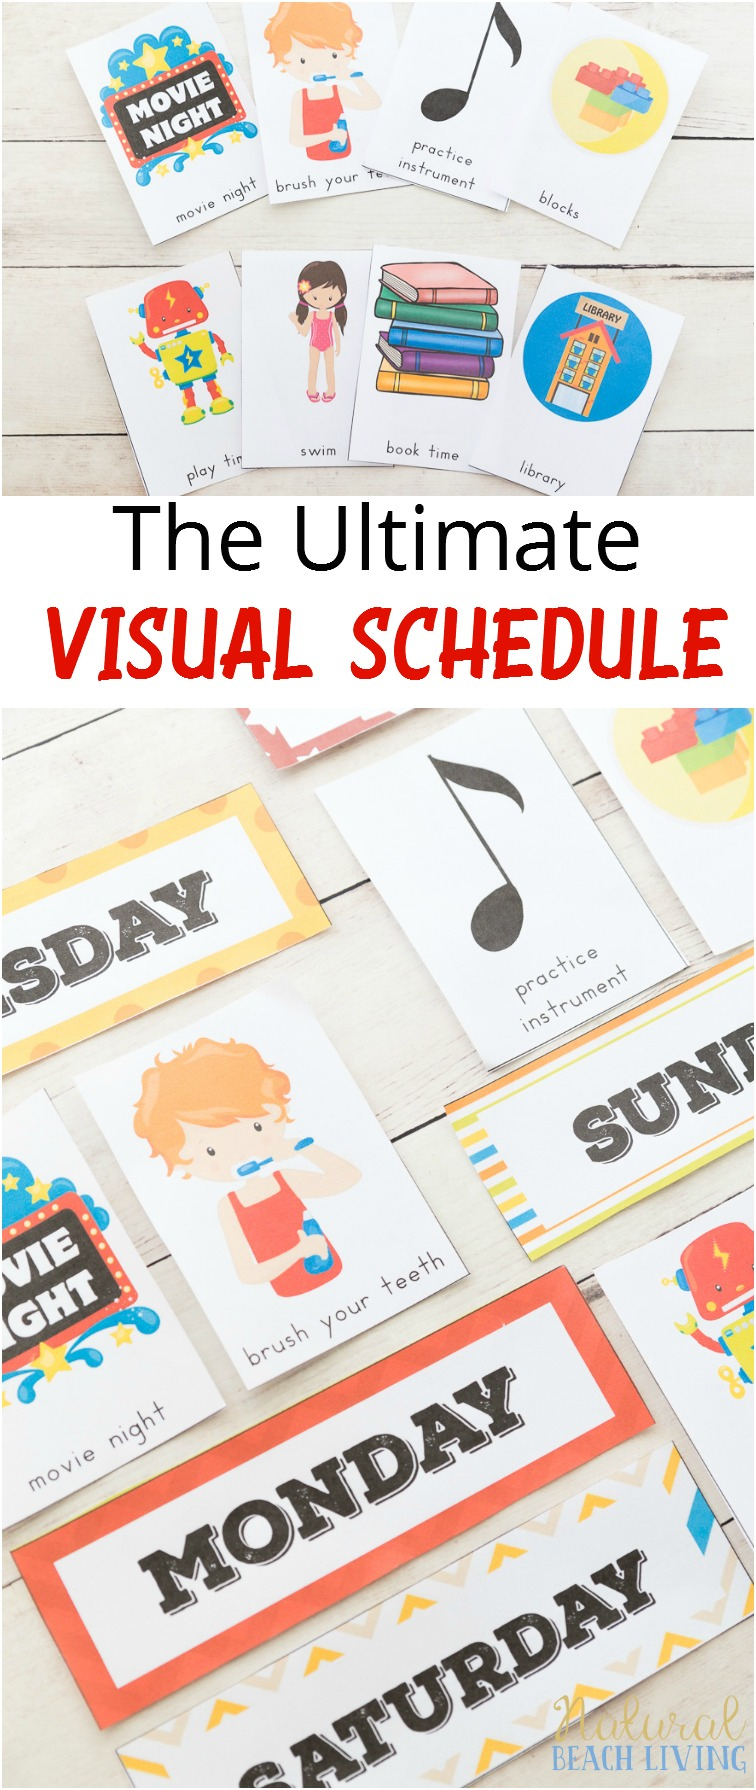 Daily Visual Schedule For Kids Free Printable - Natural Beach Living - Free Printable Daily Routine Picture Cards